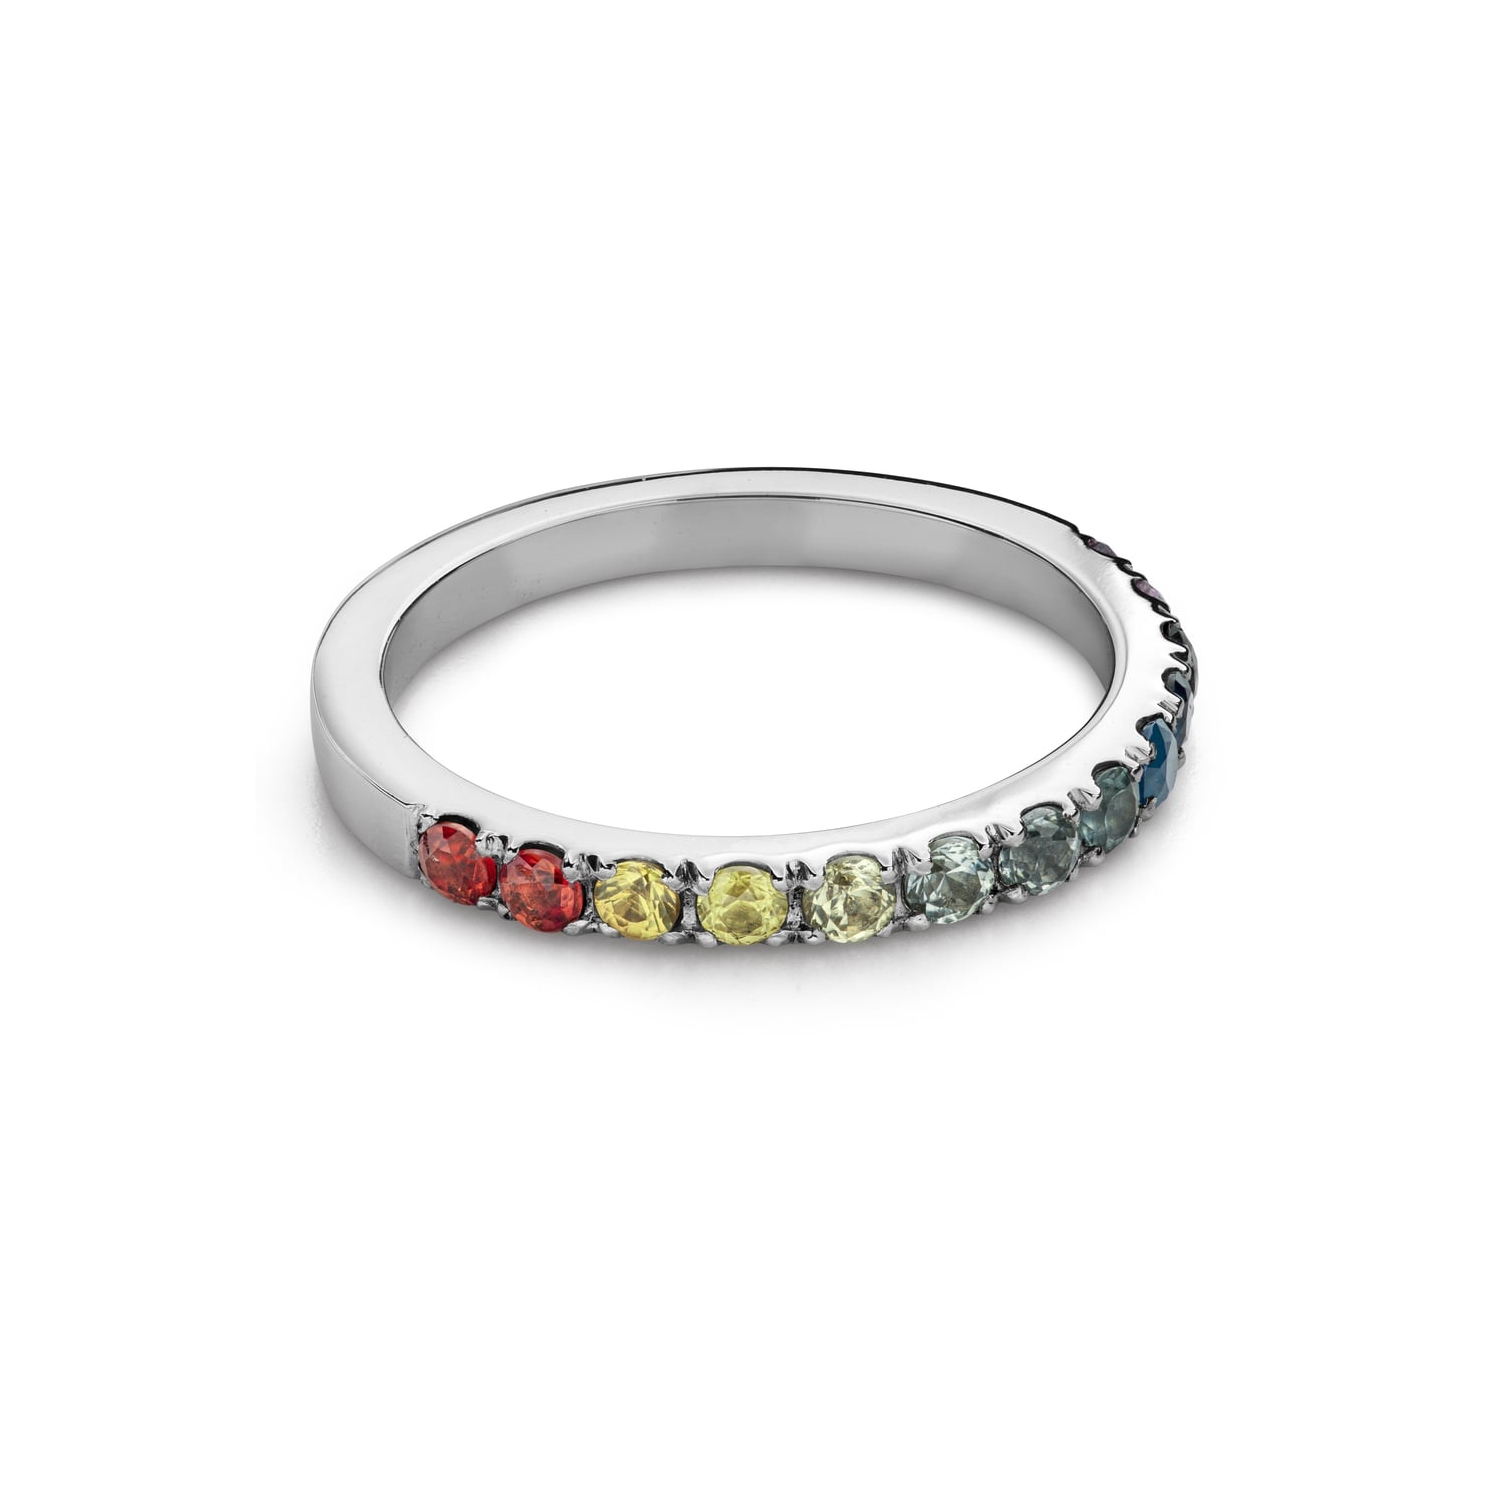 Engagement ring with gemstones "Colors 123"